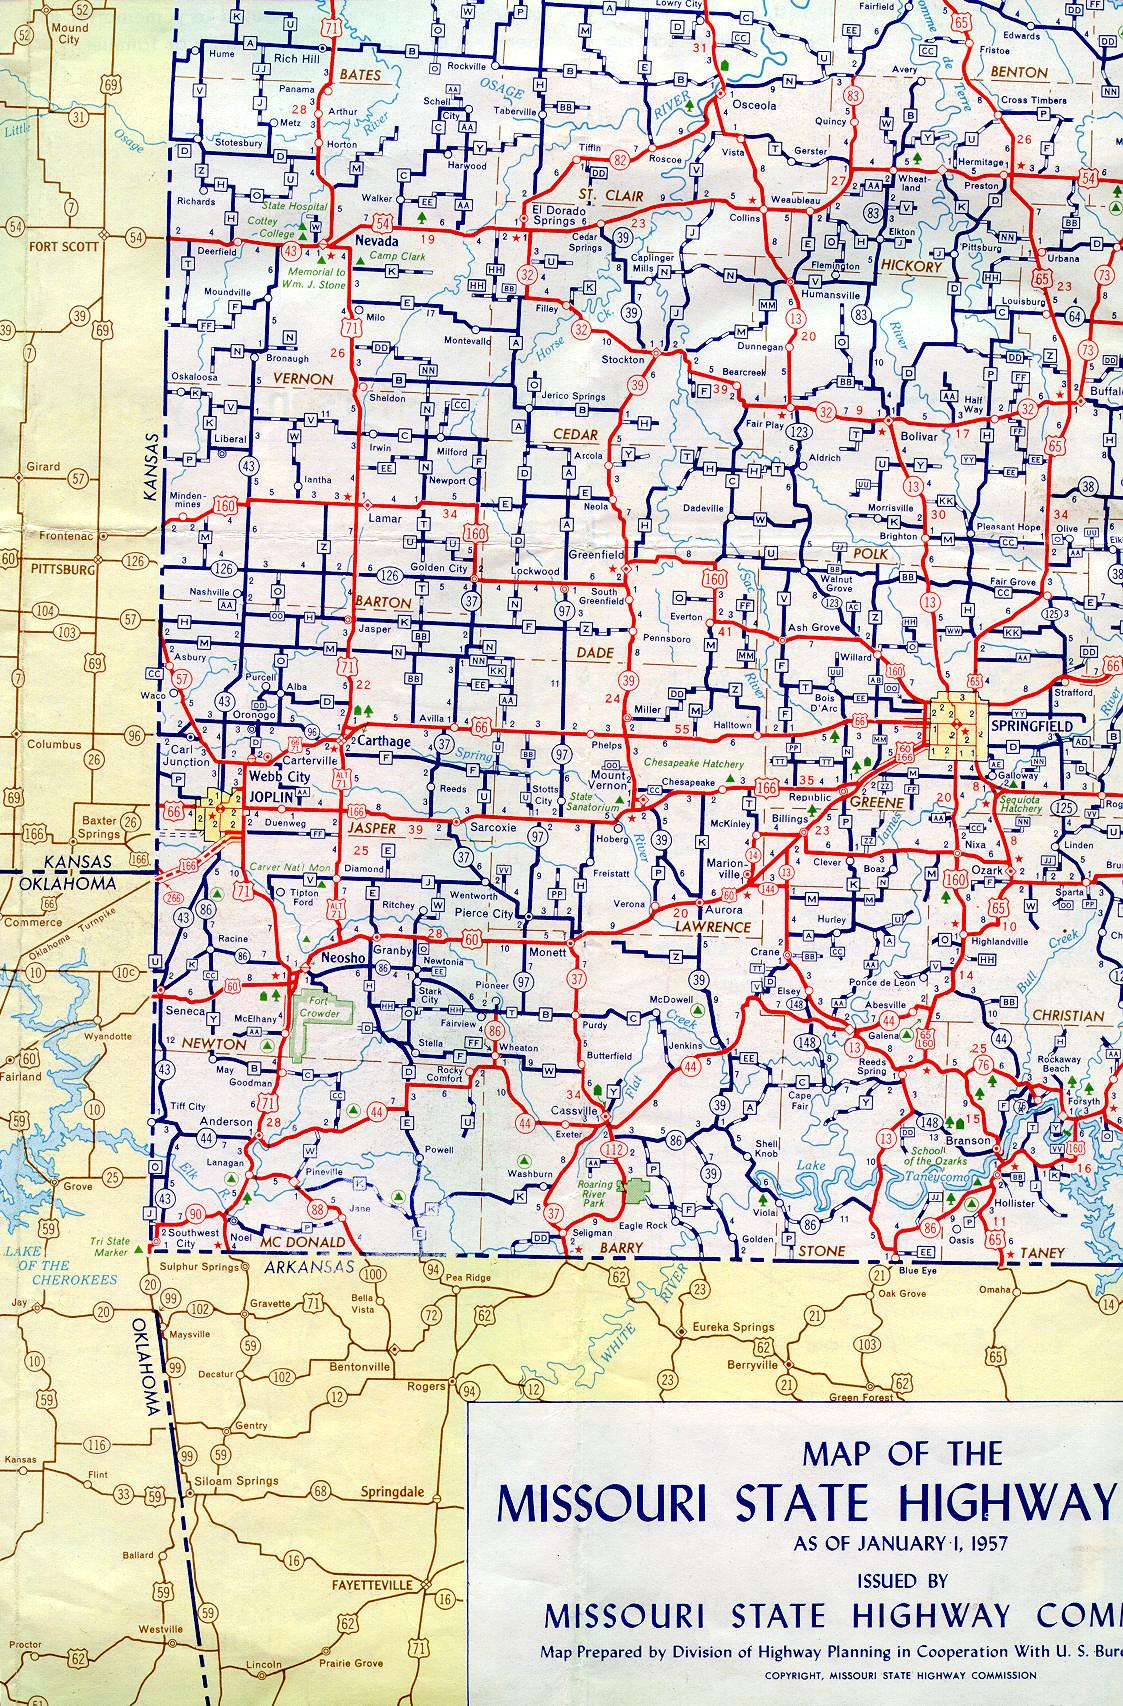 Section of 1957 official highway map for Missouri